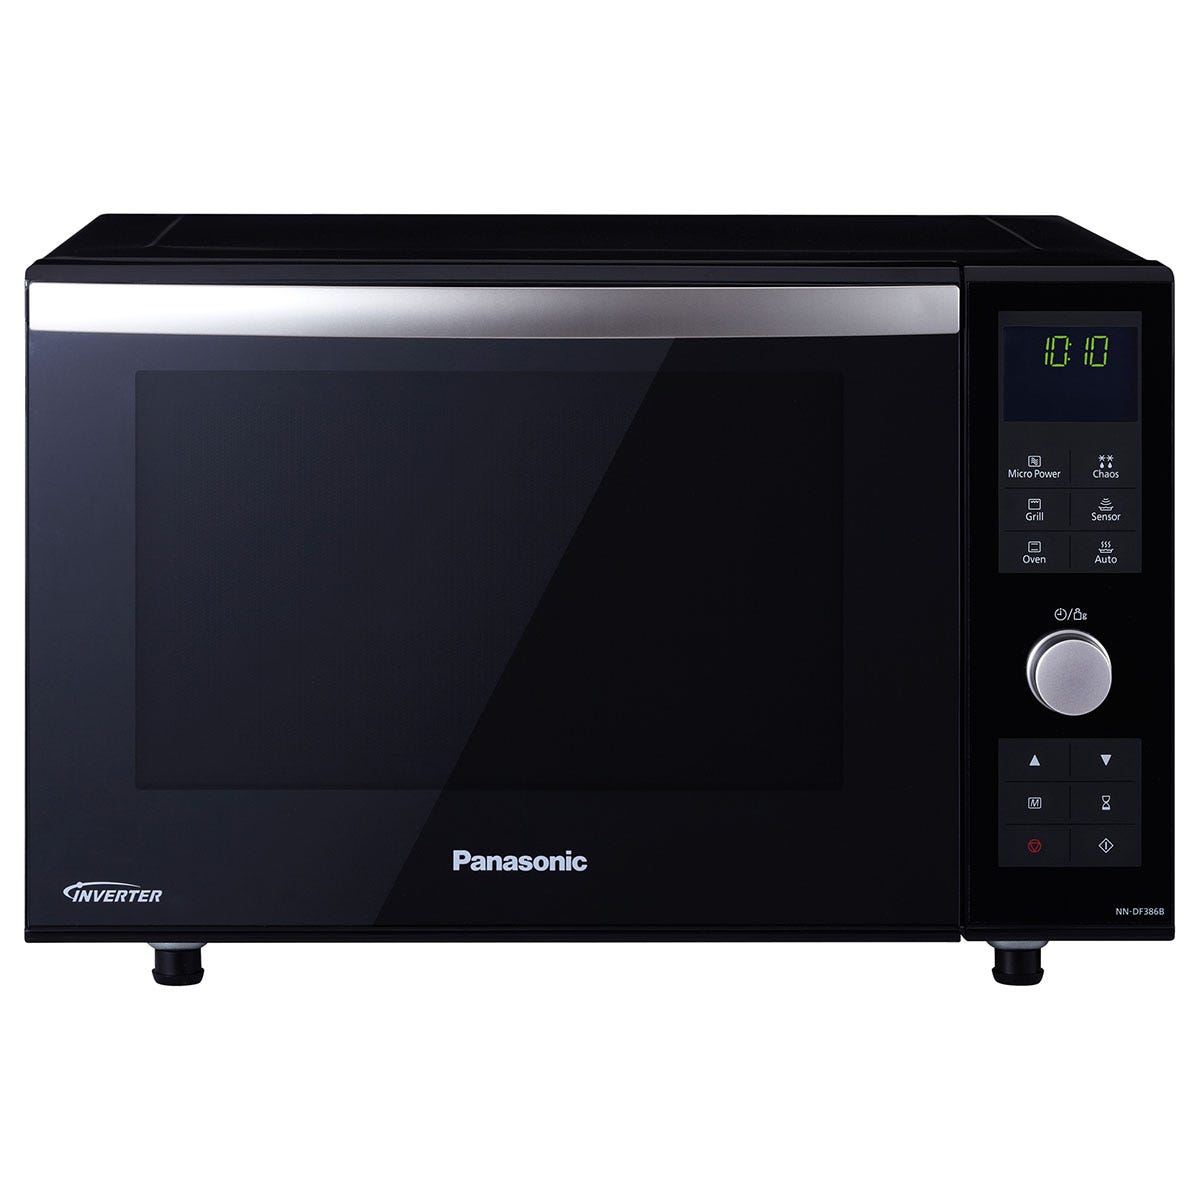 Panasonic NN-DF386BBPQ 3-in-1 Combi Inverter 23L Microwave with Grill - Black